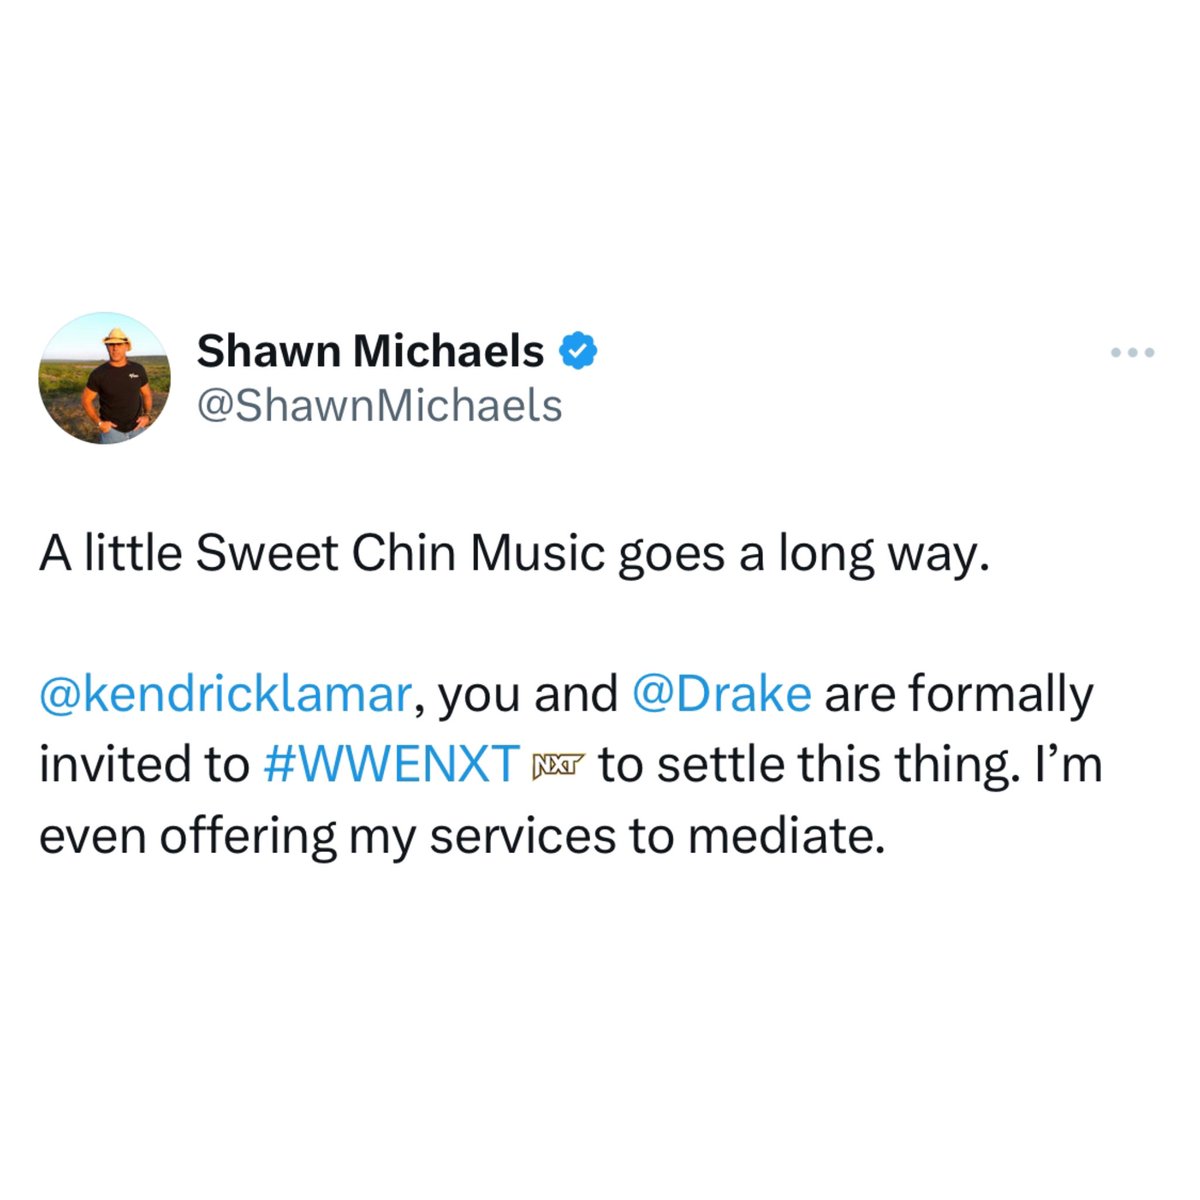 WWE legend Shawn Michaels invites Drake and Kendrick to settle their differences inside the ring.